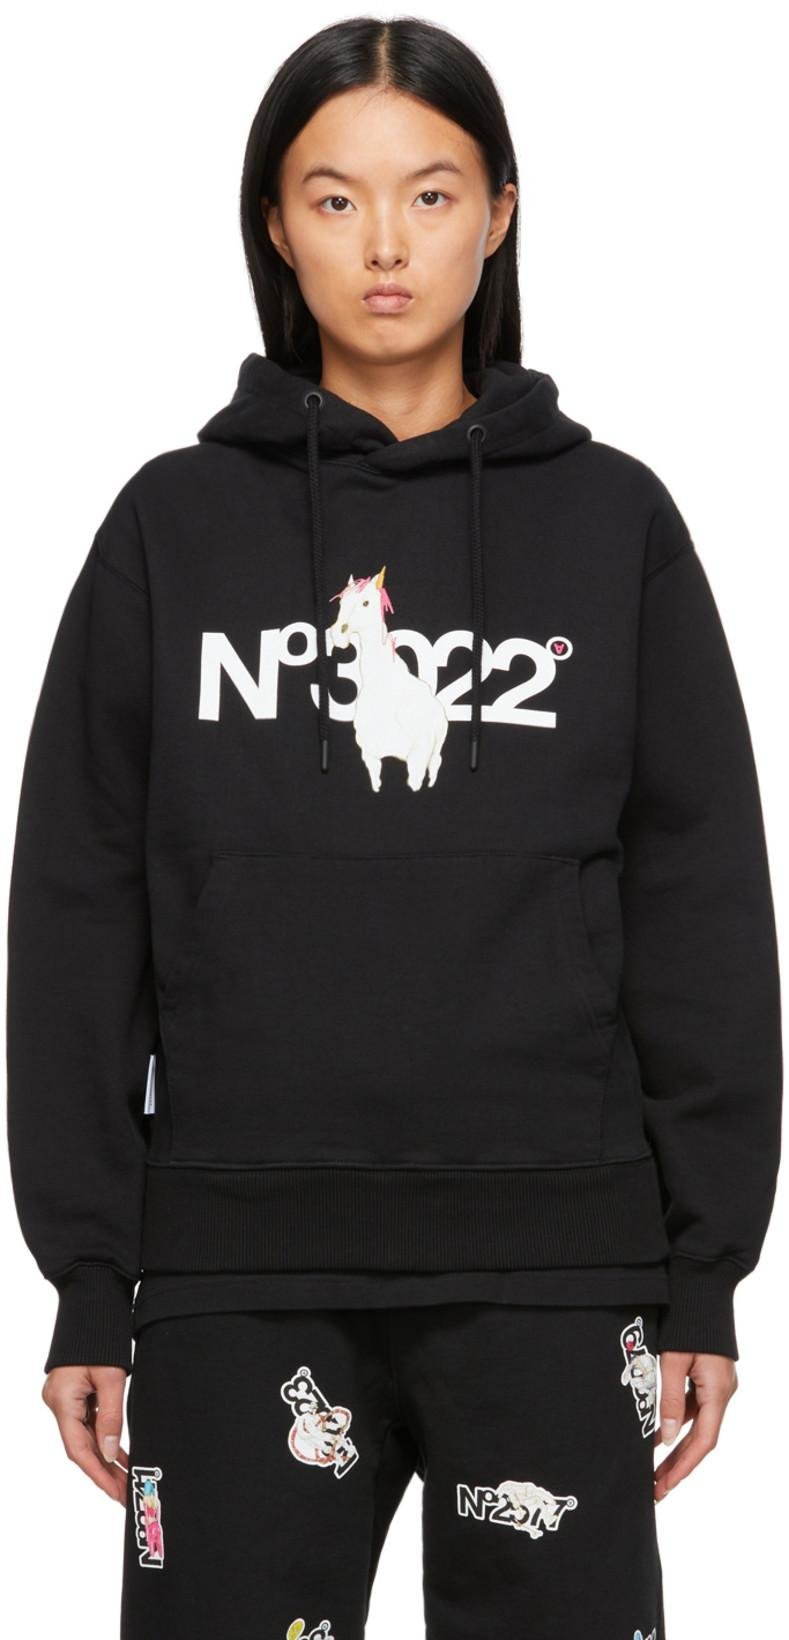 SSENSE Exclusive Black 'No3022' Hoodie by AITOR THROUPS THE DSA